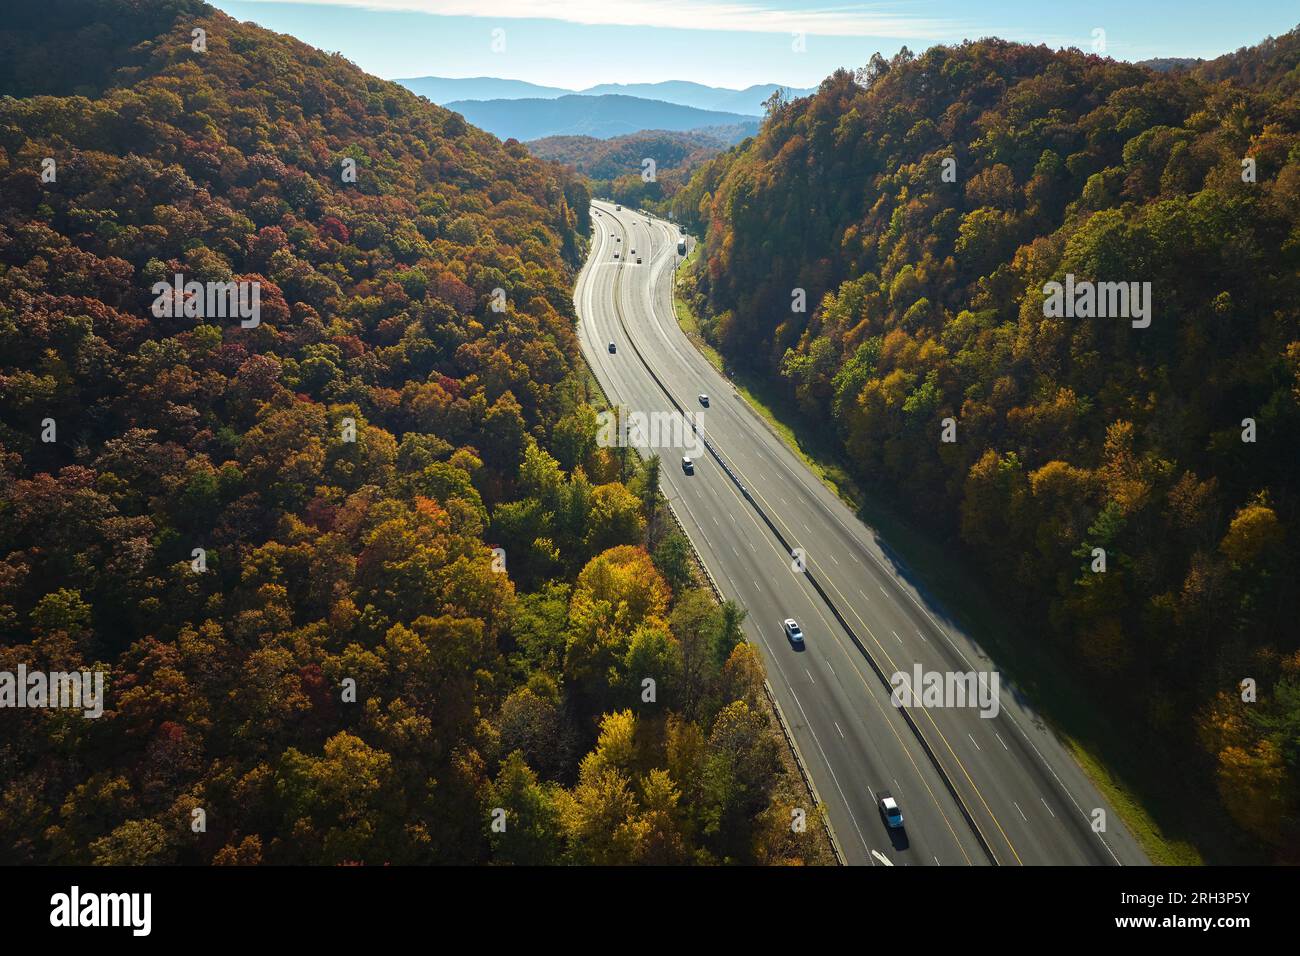 Aerial view of I-40 freeway in North Carolina leading to Asheville through Appalachian mountains in golden fall with fast moving trucks and cars Stock Photo